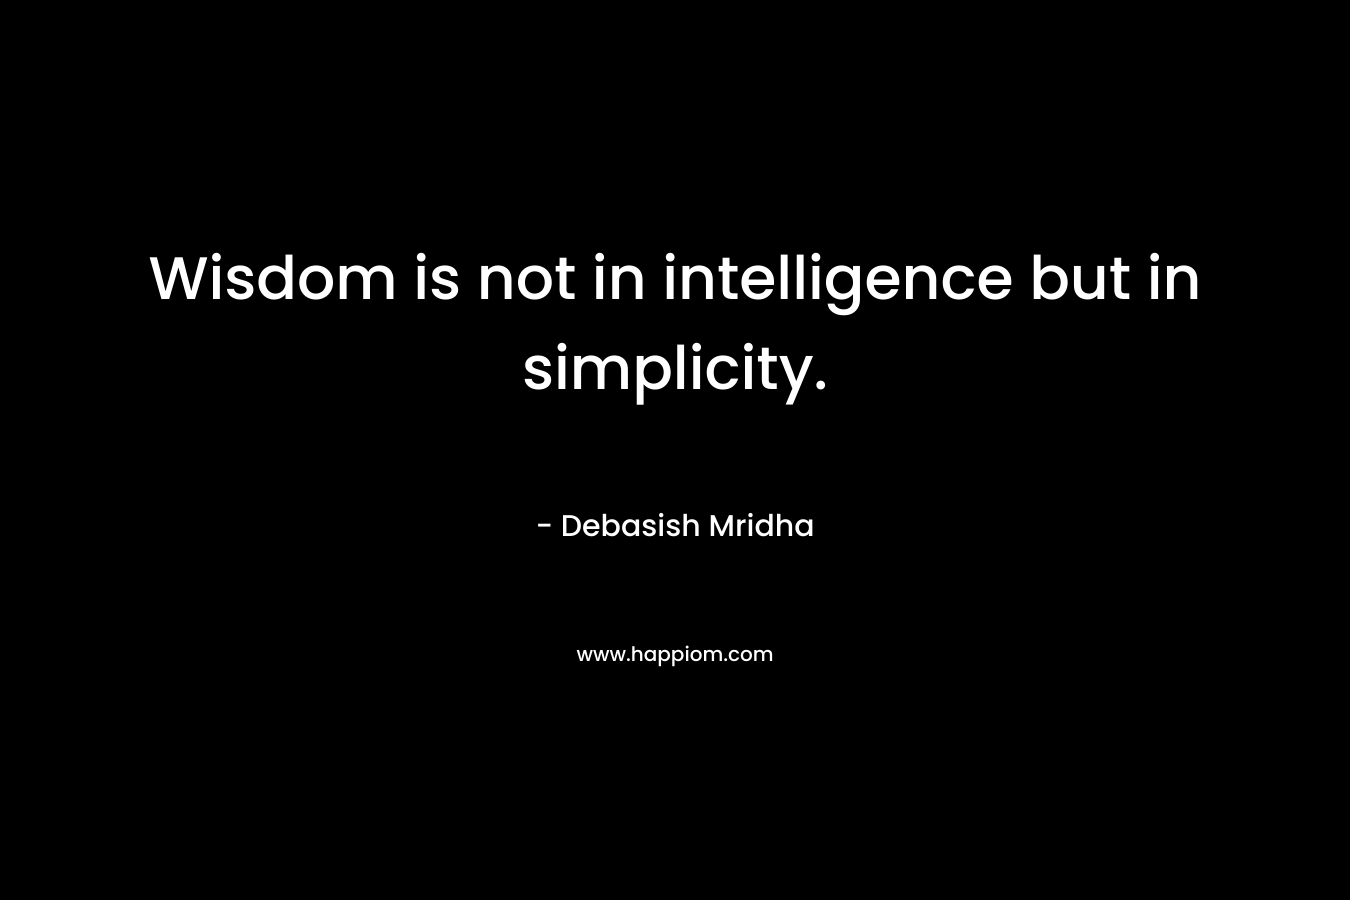 Wisdom is not in intelligence but in simplicity.